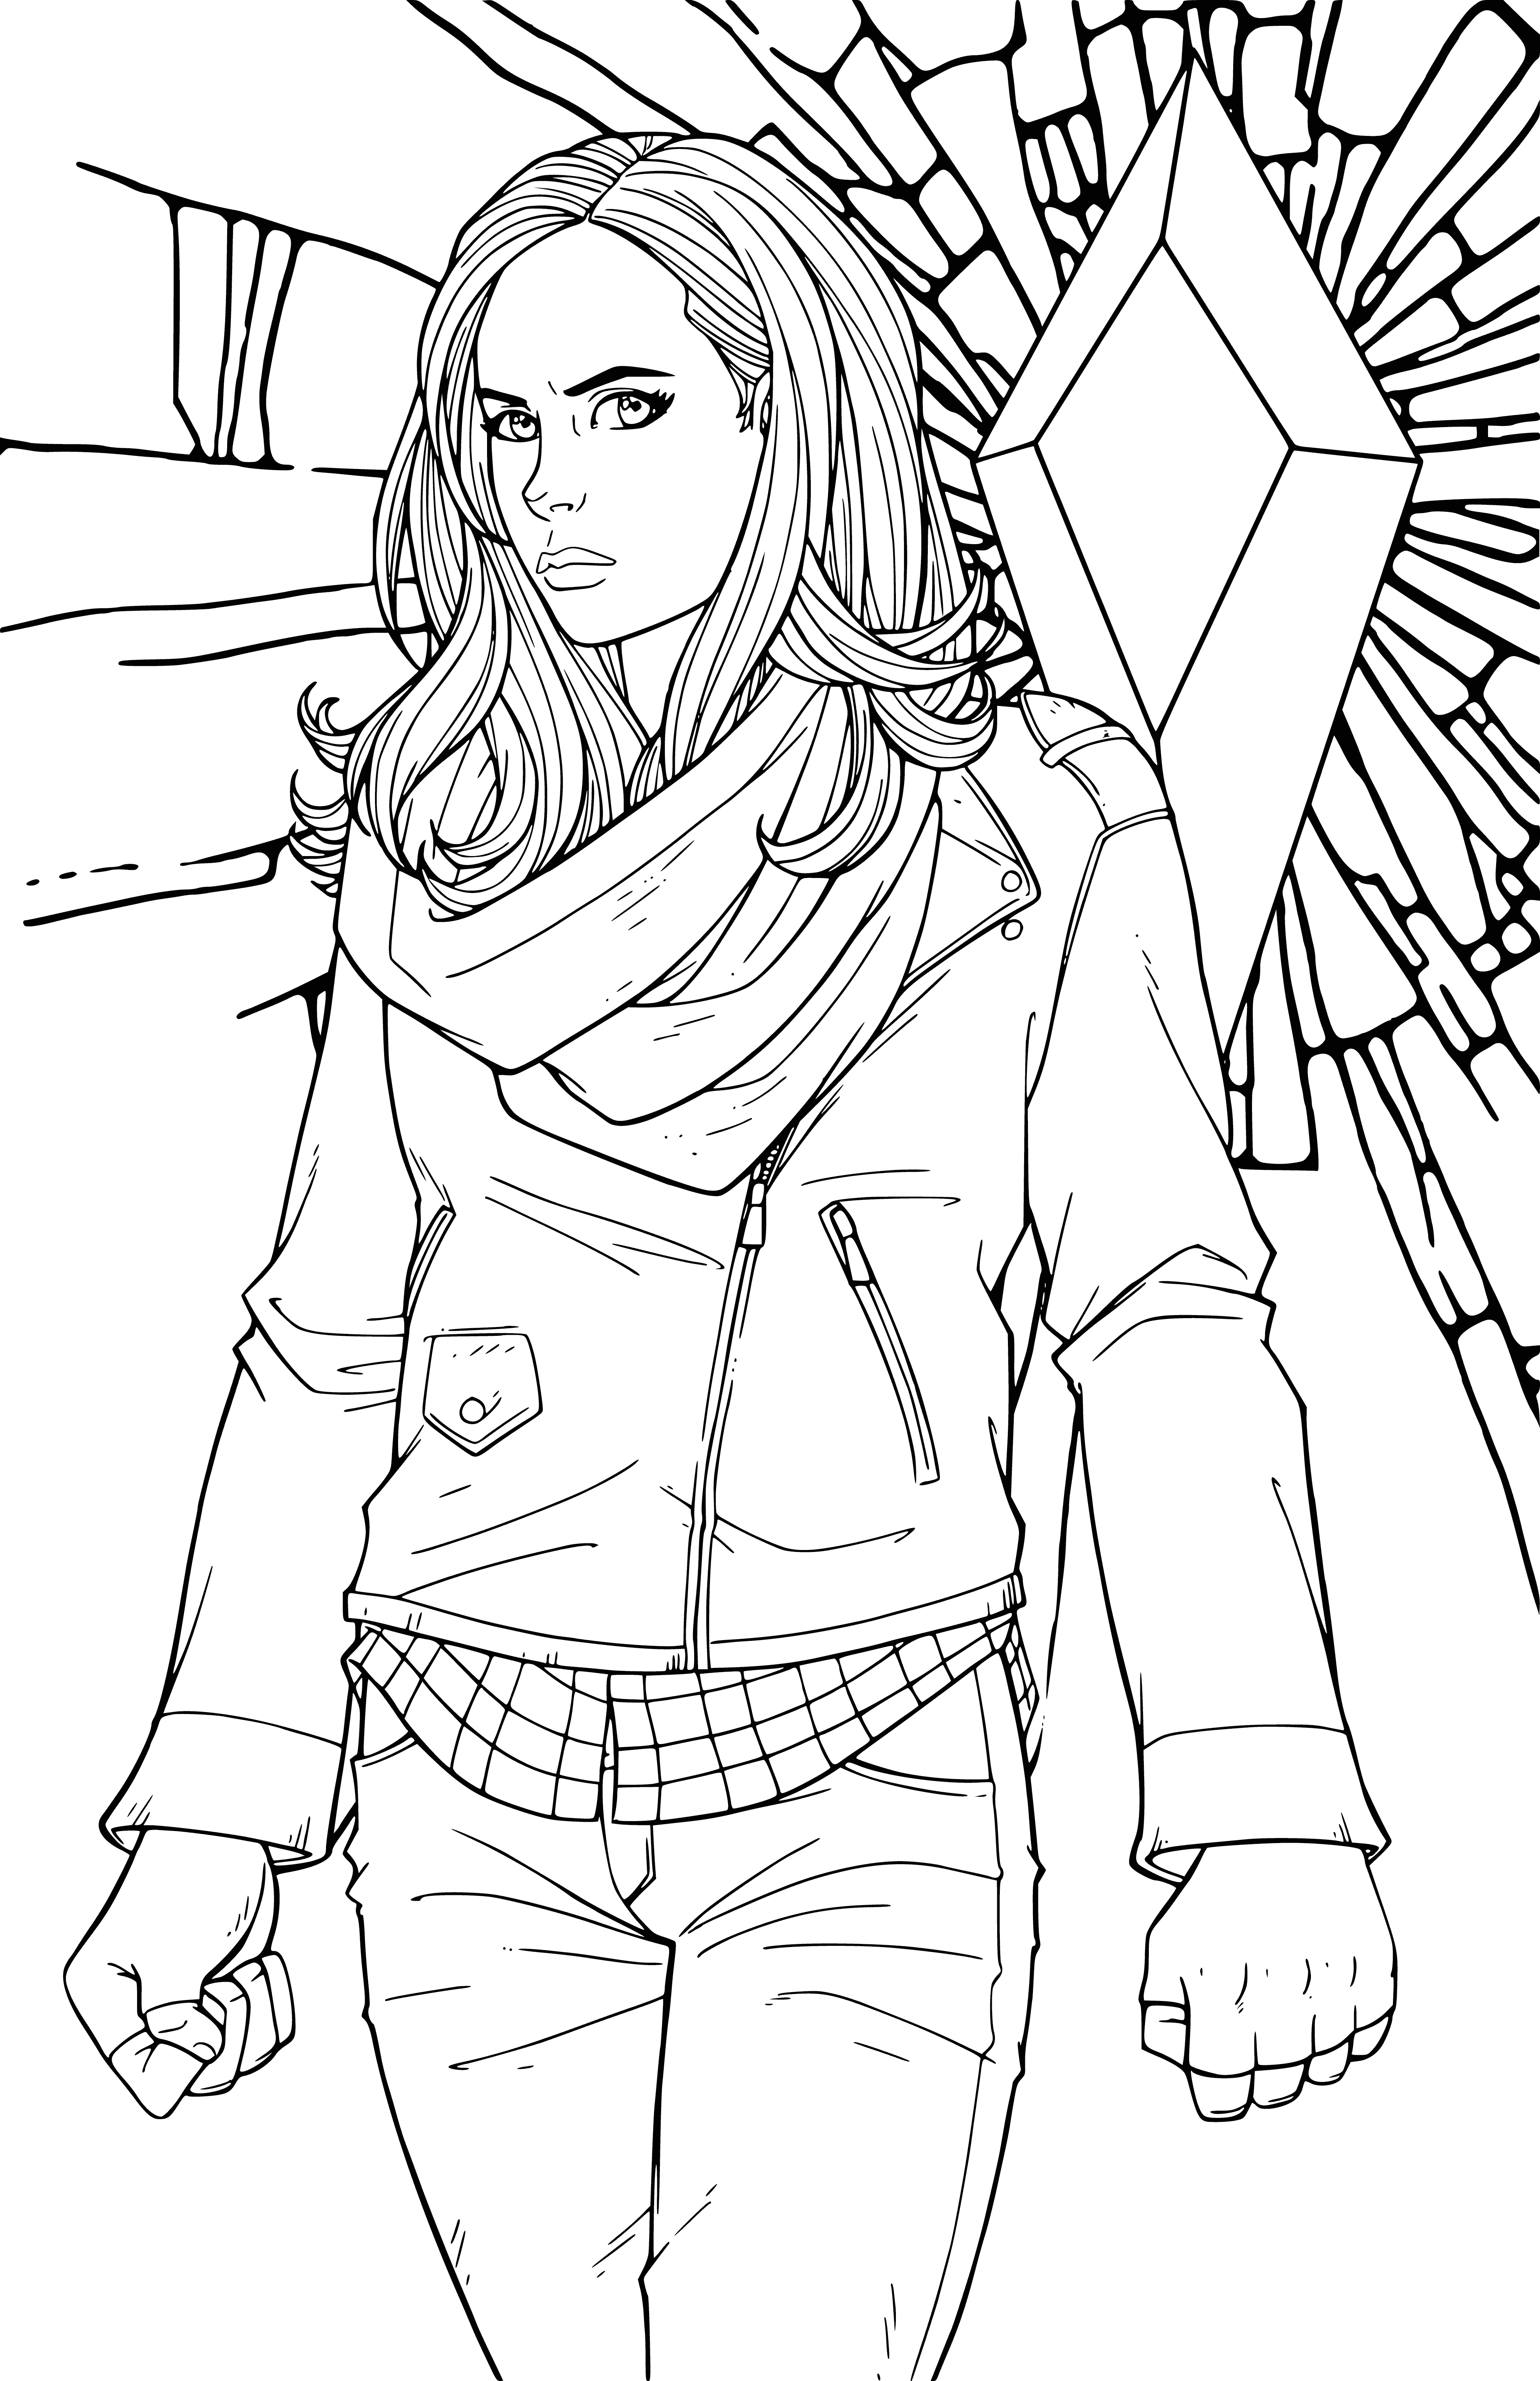 coloring page: Woman with dark hair, leather jacket & tank top; serious expression. #BadAss